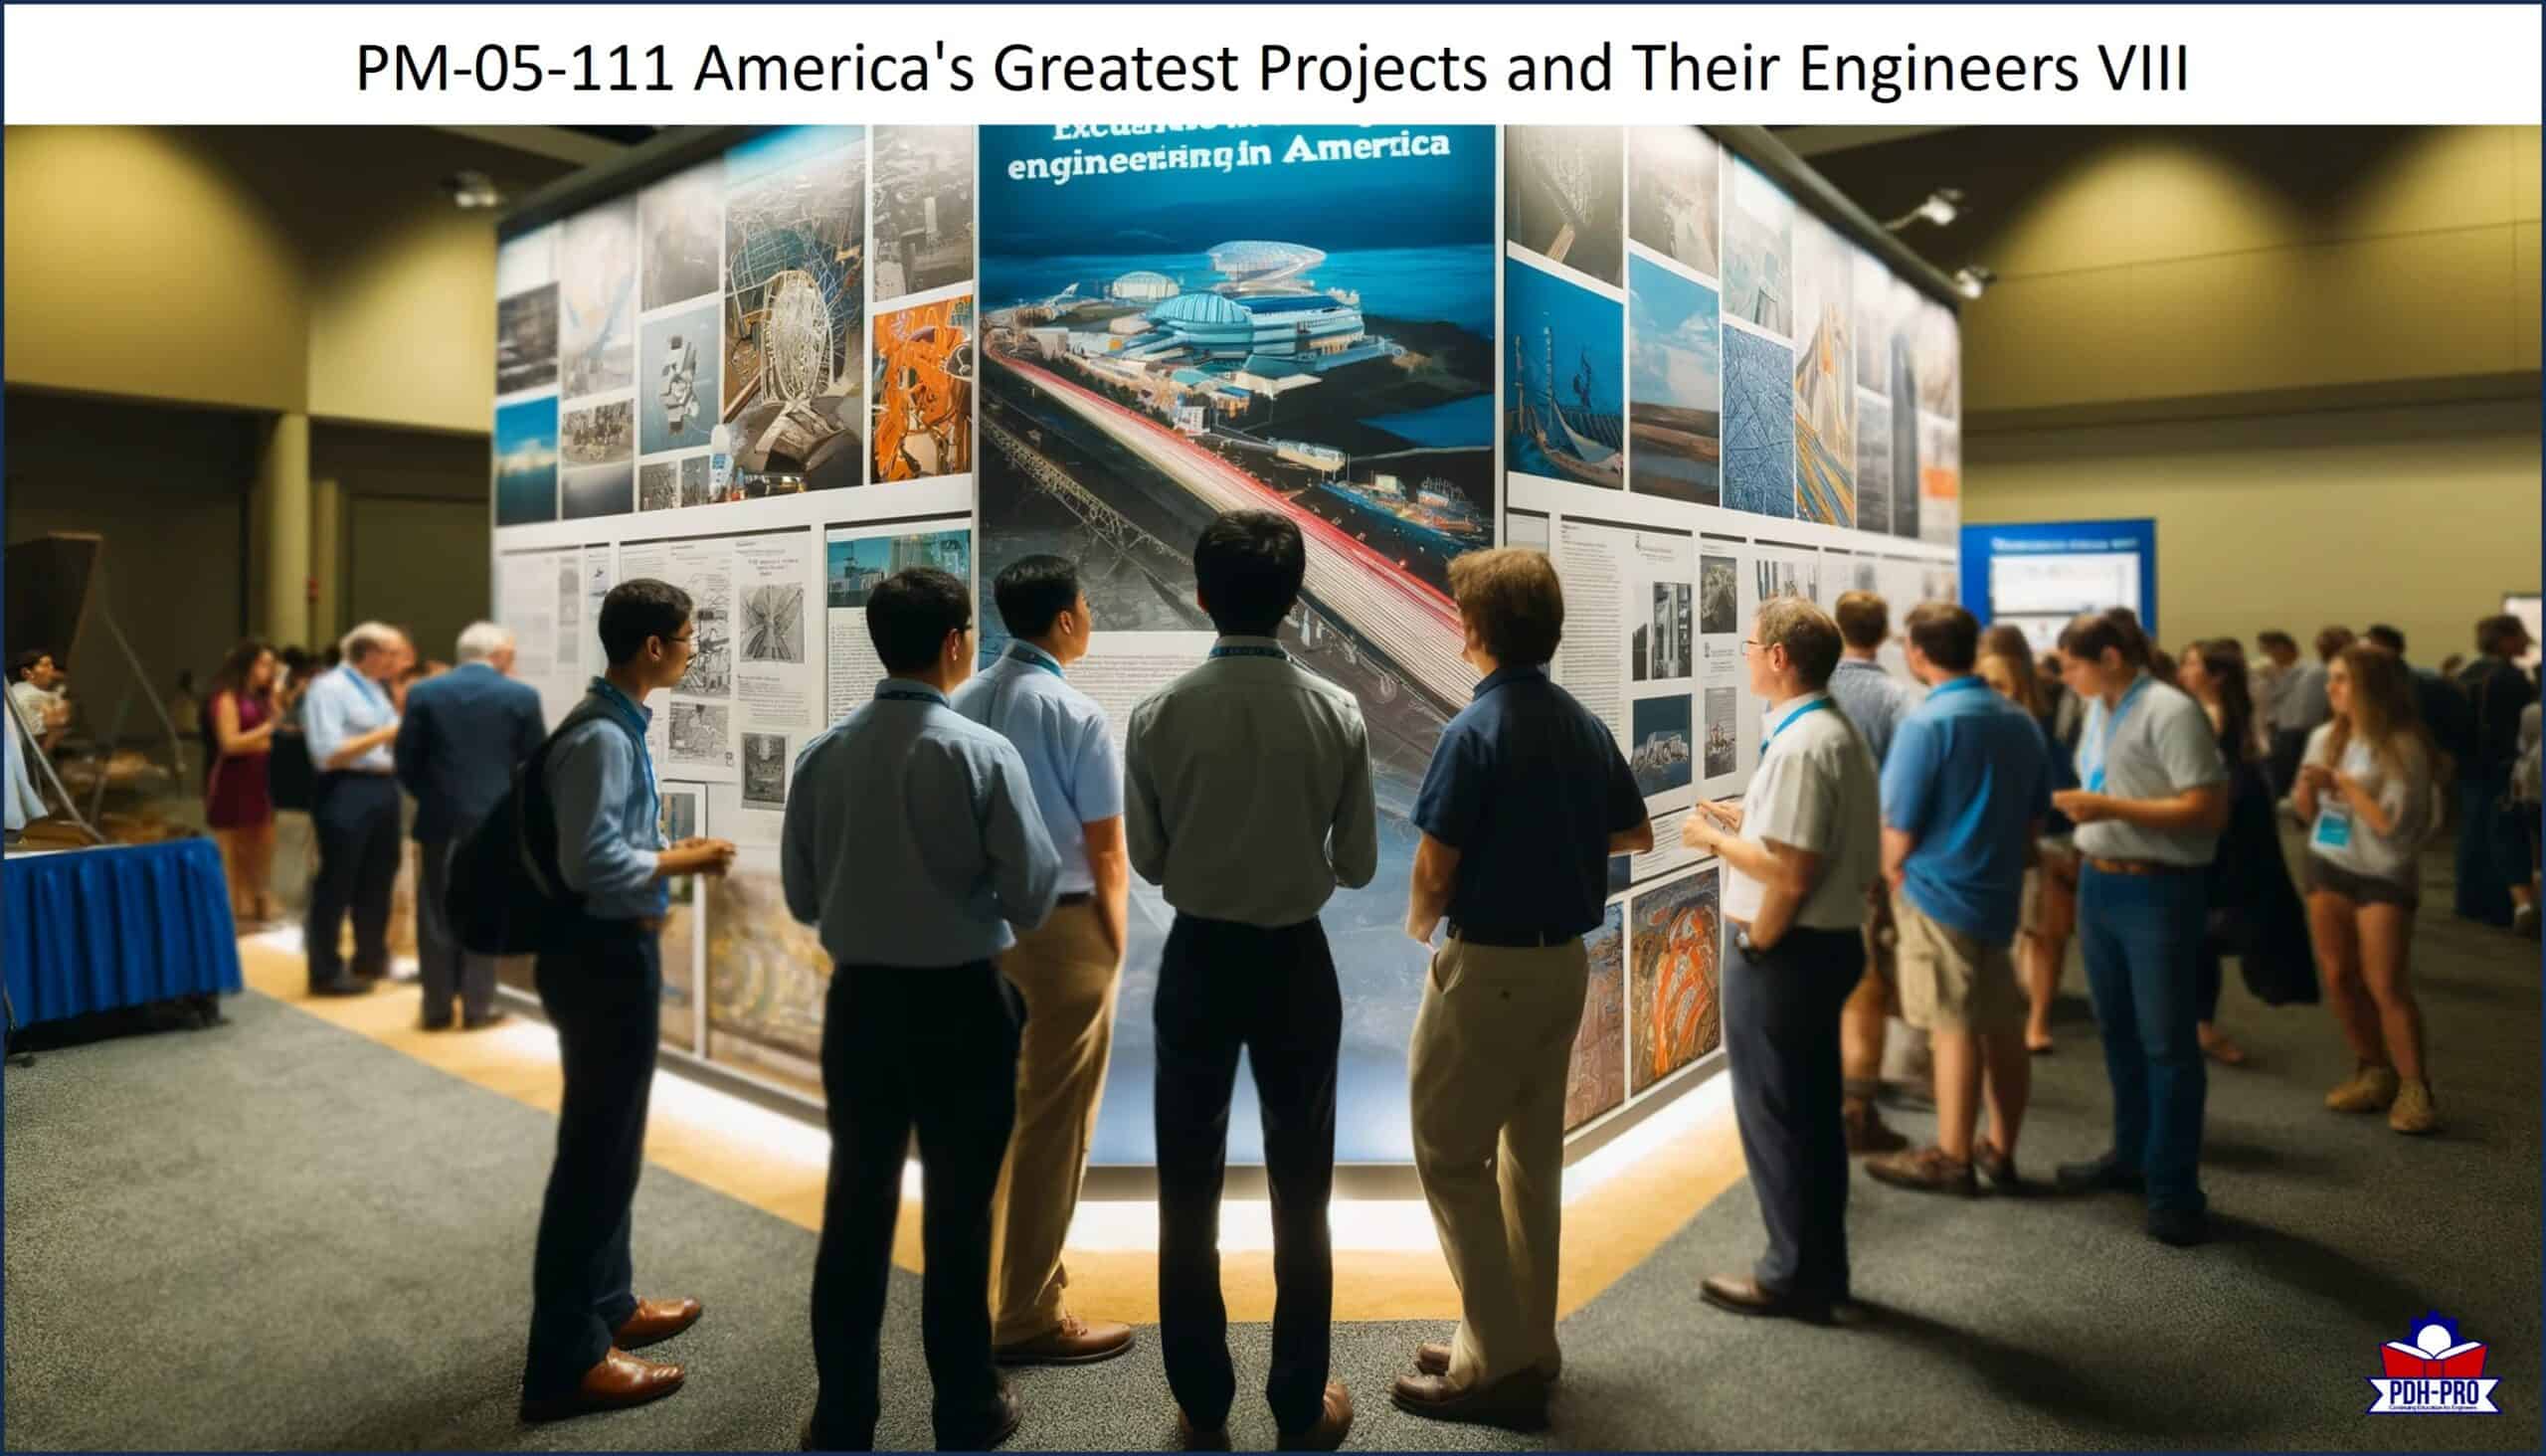 America's Greatest Projects and Their Engineers VIII